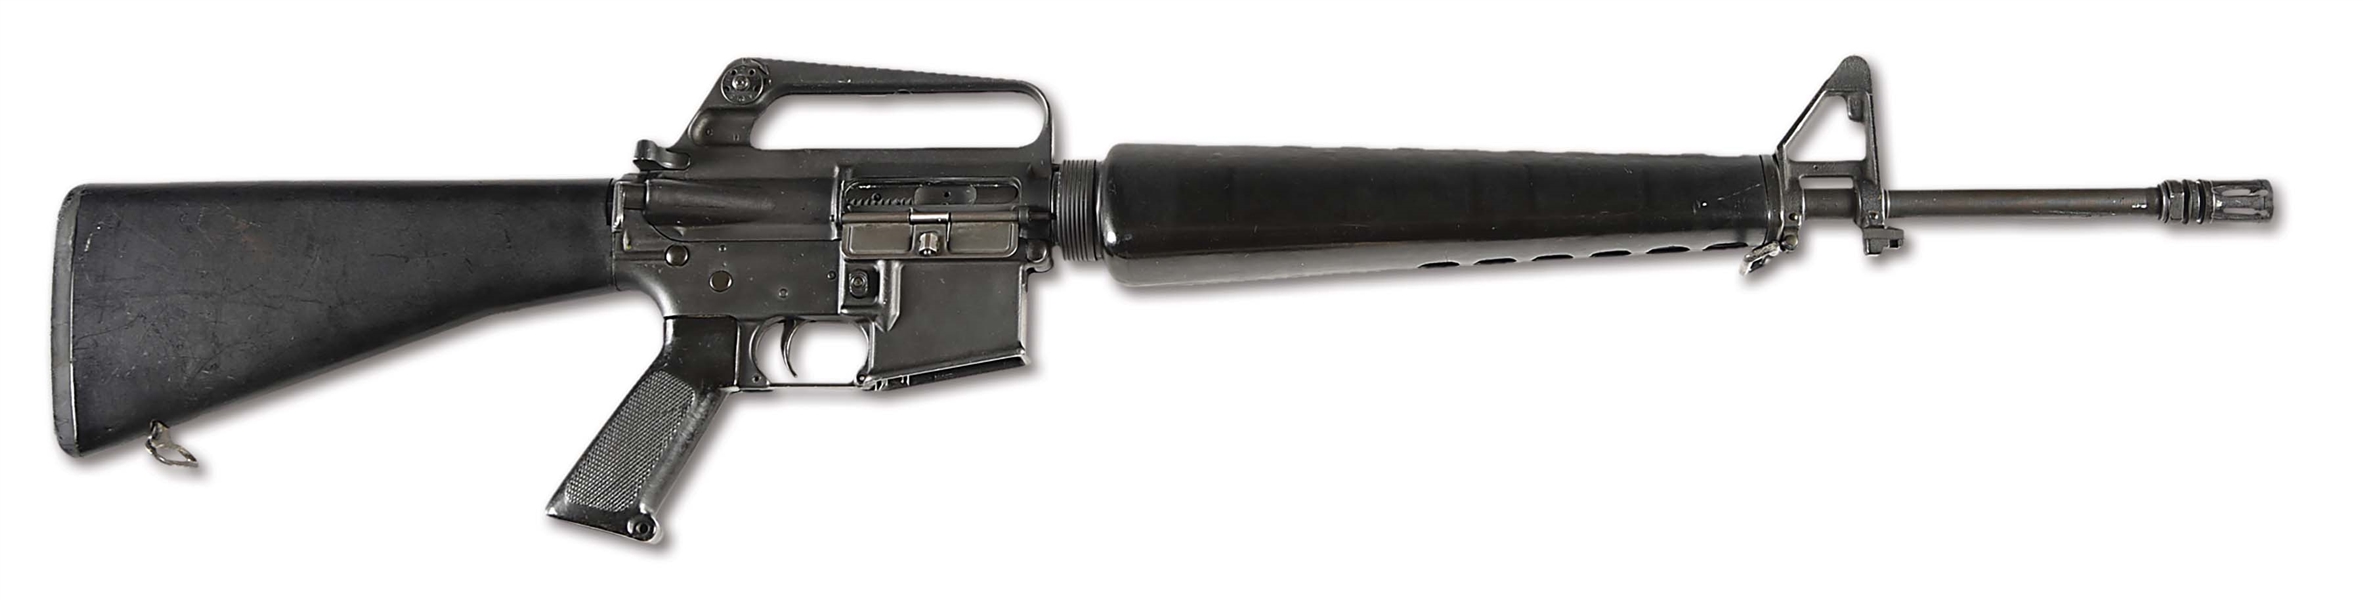 (N) SCARCE AND DESIRABLE EARLY 1970S ERA COLT M16 MACHINE GUN IN CLASSIC MILITARY CONFIGURATION (FULLY TRANSFERABLE ALMOST CURIO AND RELIC).